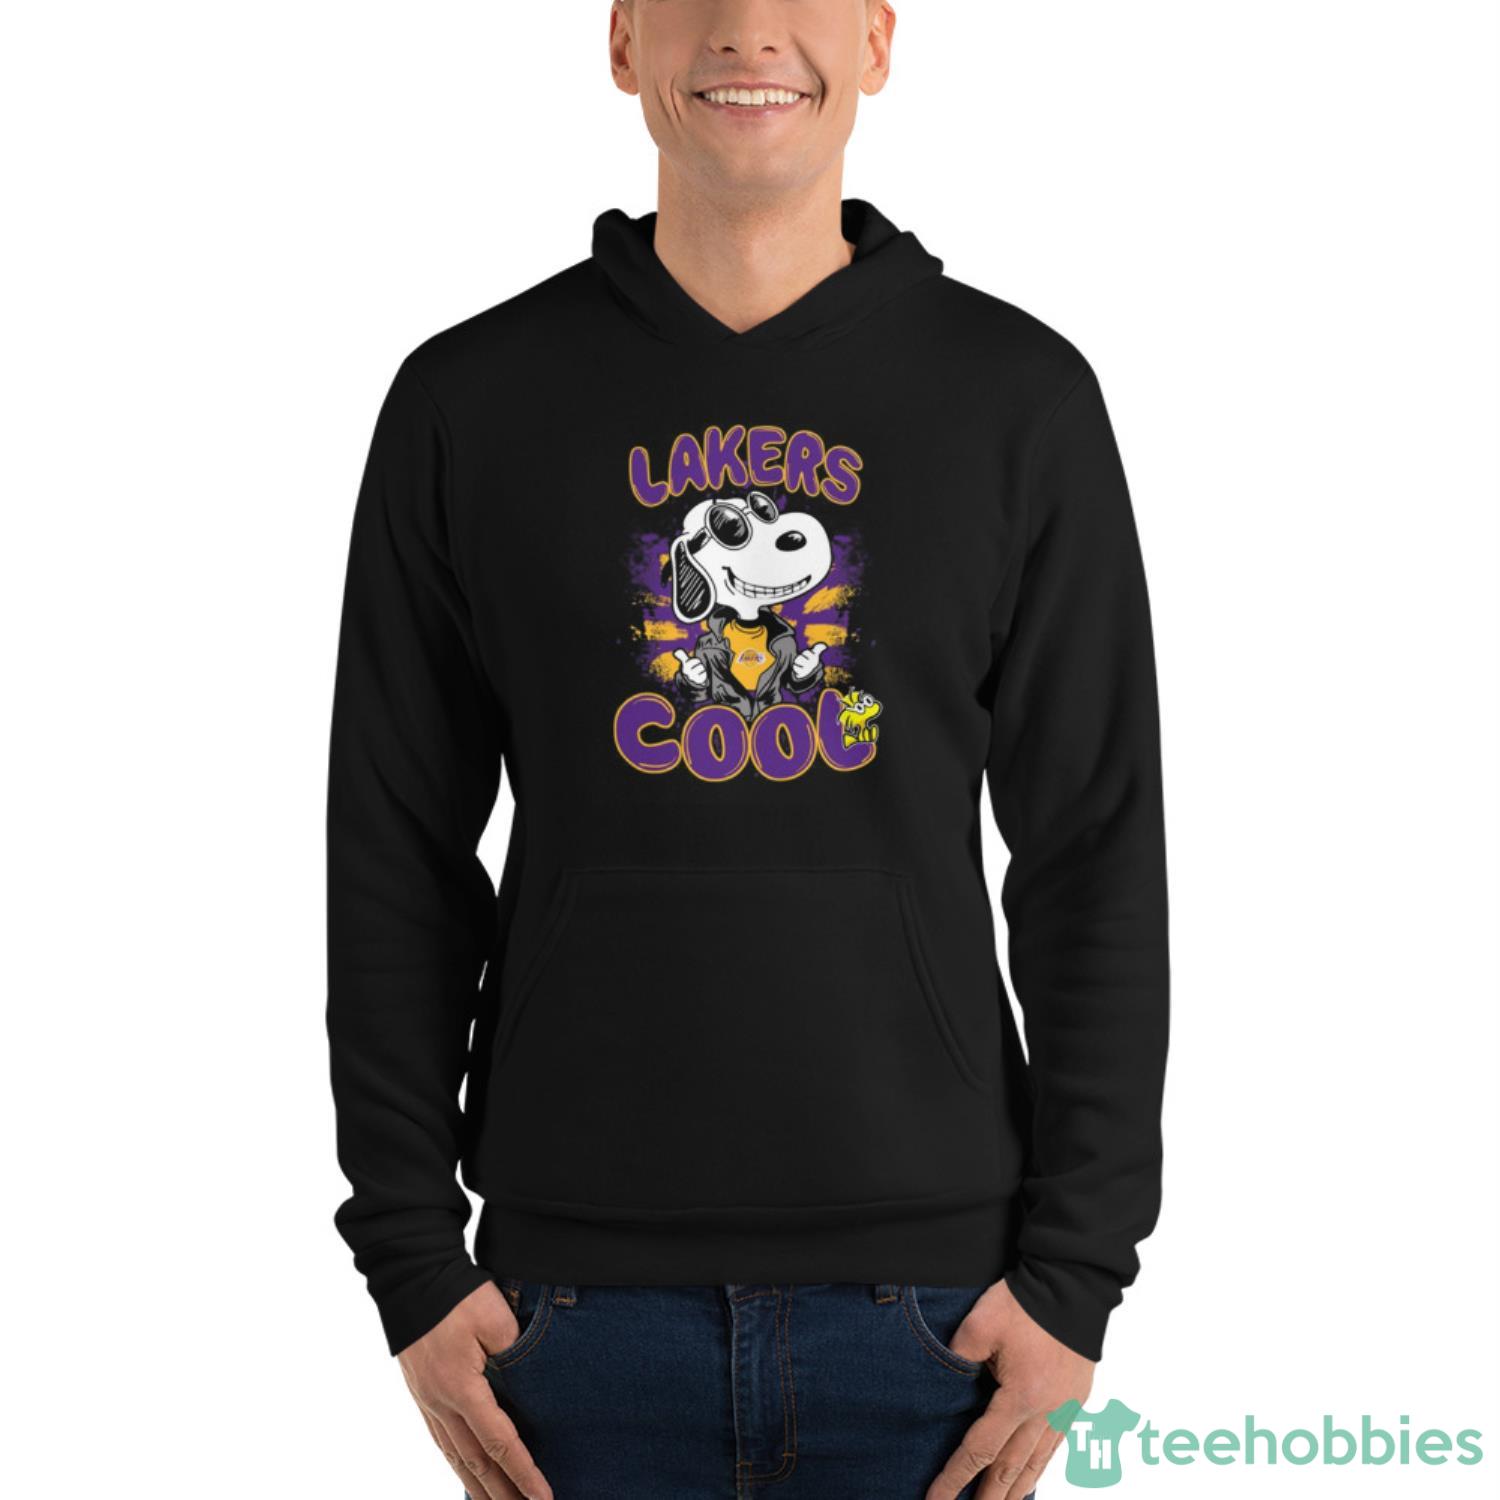 NBA Basketball Los Angeles Lakers Cool Snoopy Shirt T Shirt - Unisex Fleece Pullover Hoodie